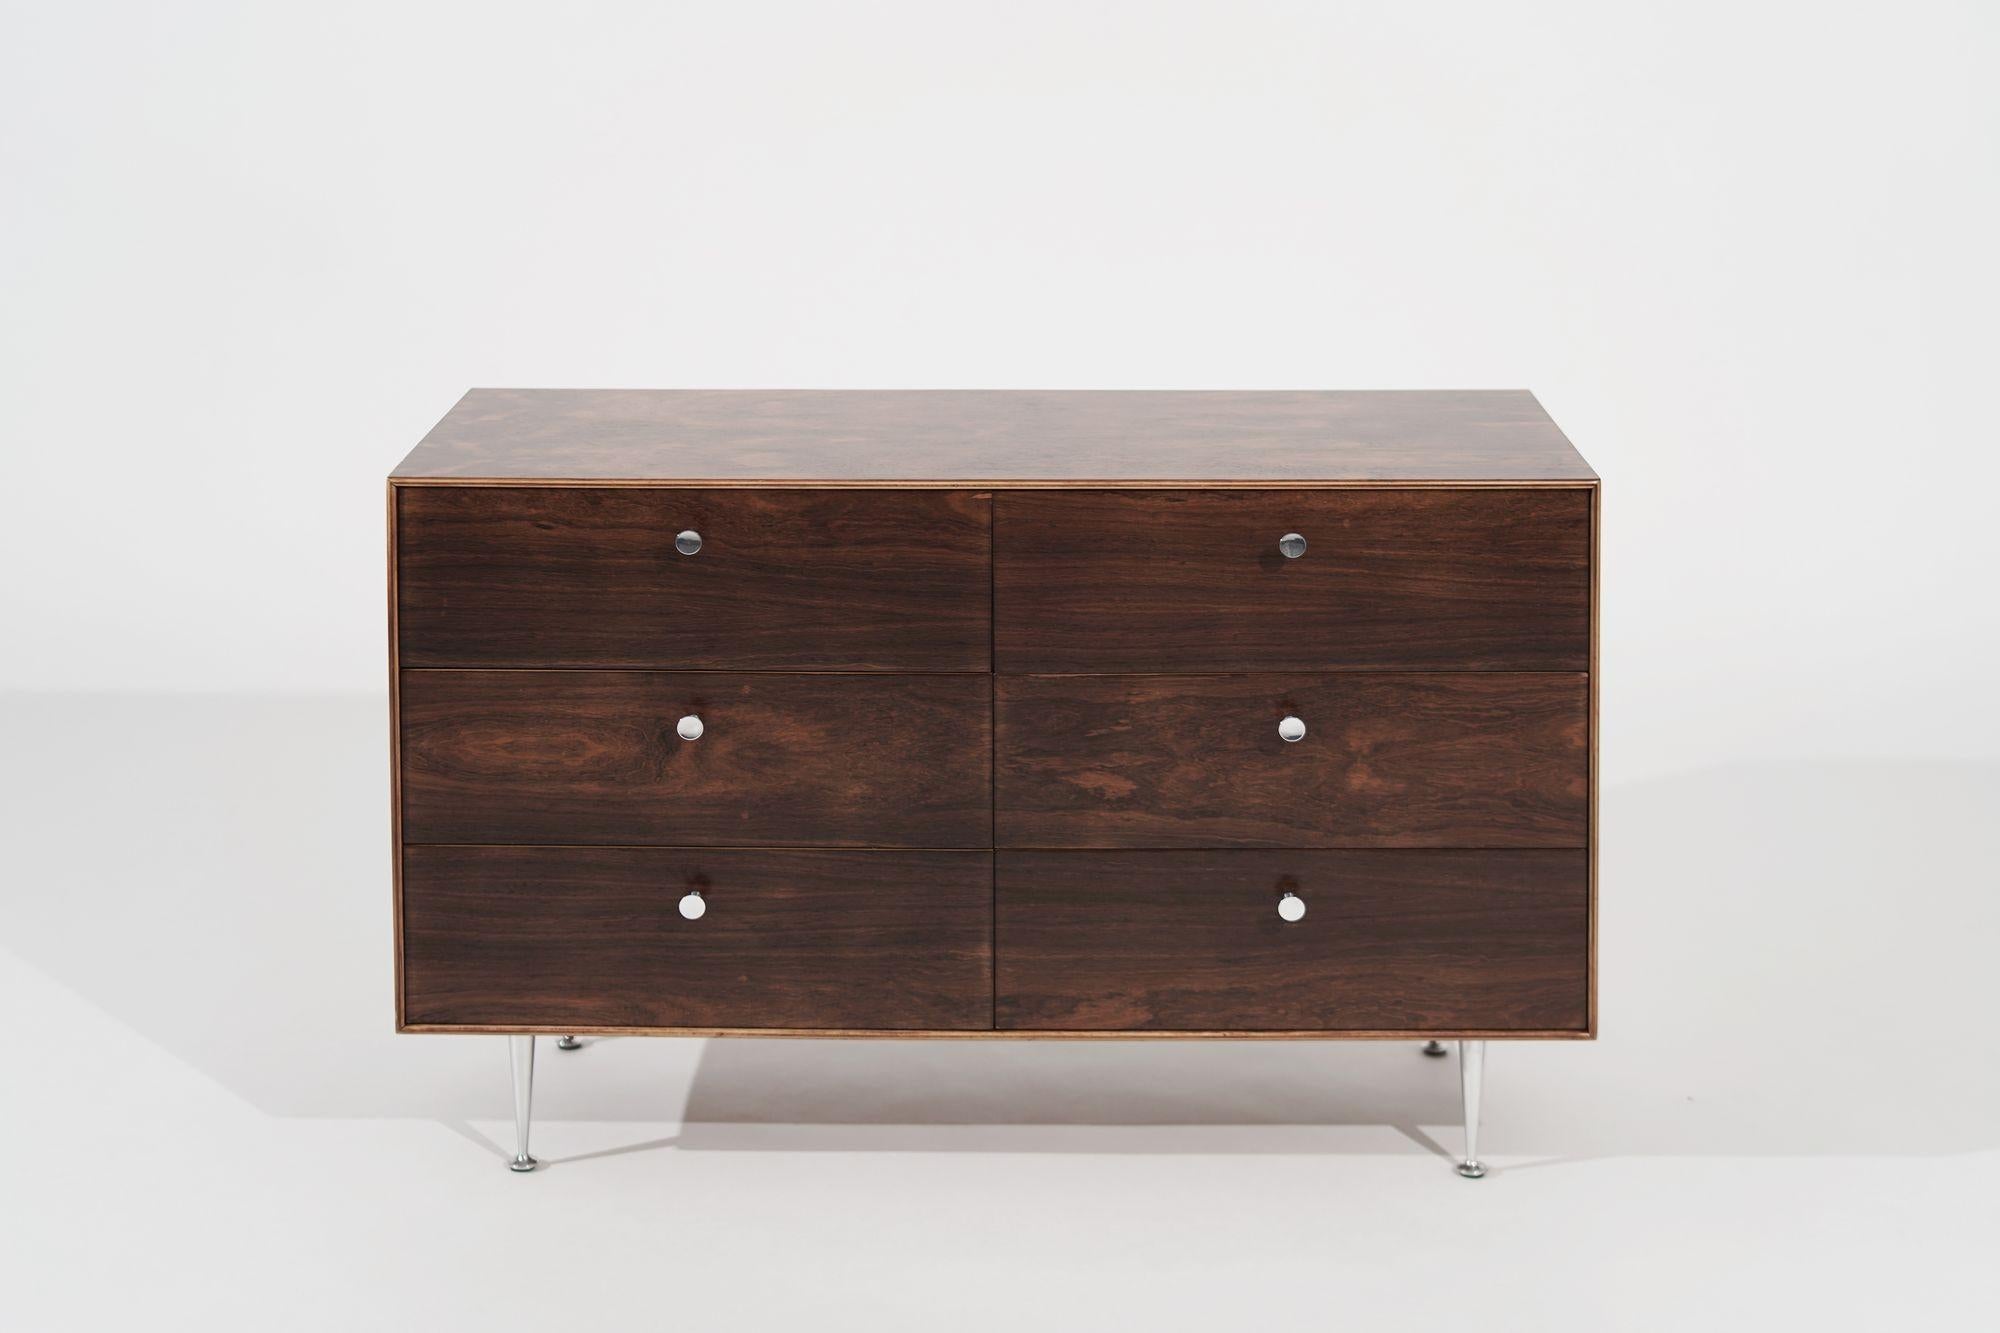 The exquisite Thin Line Rosewood Dresser by George Nelson for Herman Miller, meticulously restored to its original splendor by Stamford Modern. Crafted with timeless elegance, this mid-century modern piece showcases Nelson's unparalleled design